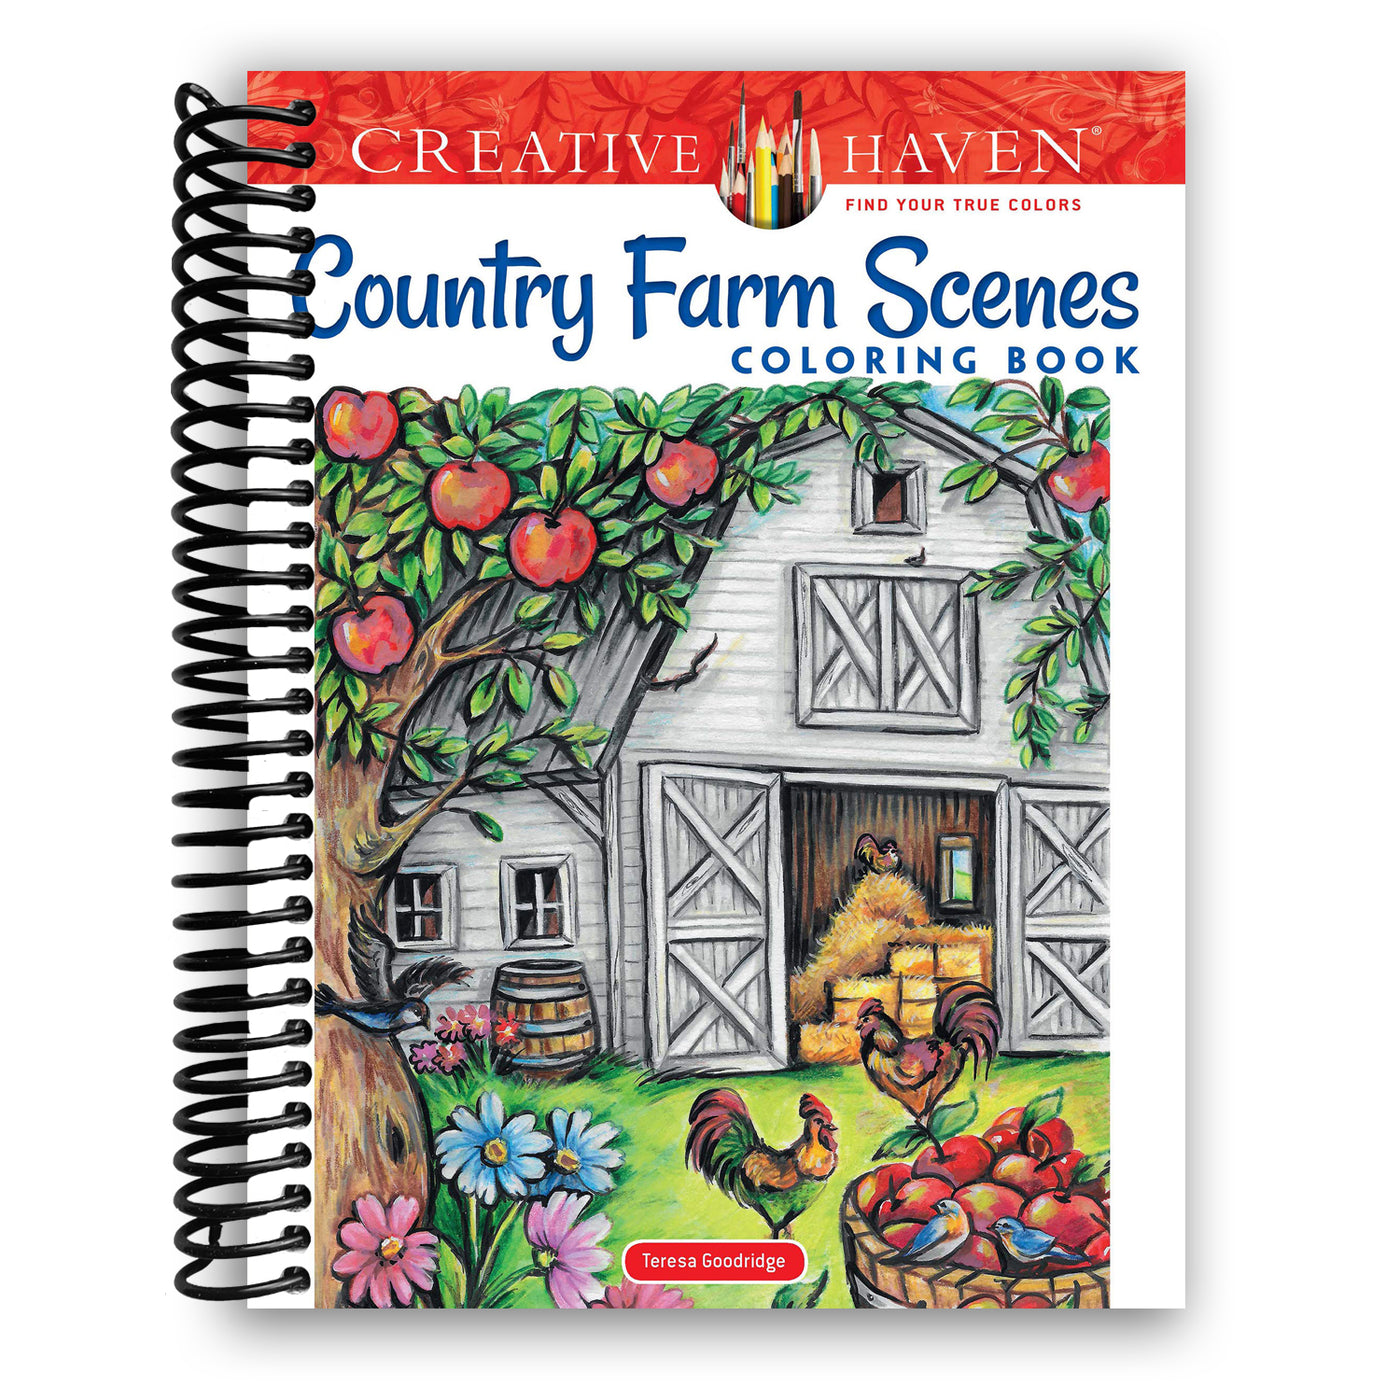 Creative Haven Country Farm Scenes Coloring Book: Relax & Find Your True Colors (Spiral Bound)